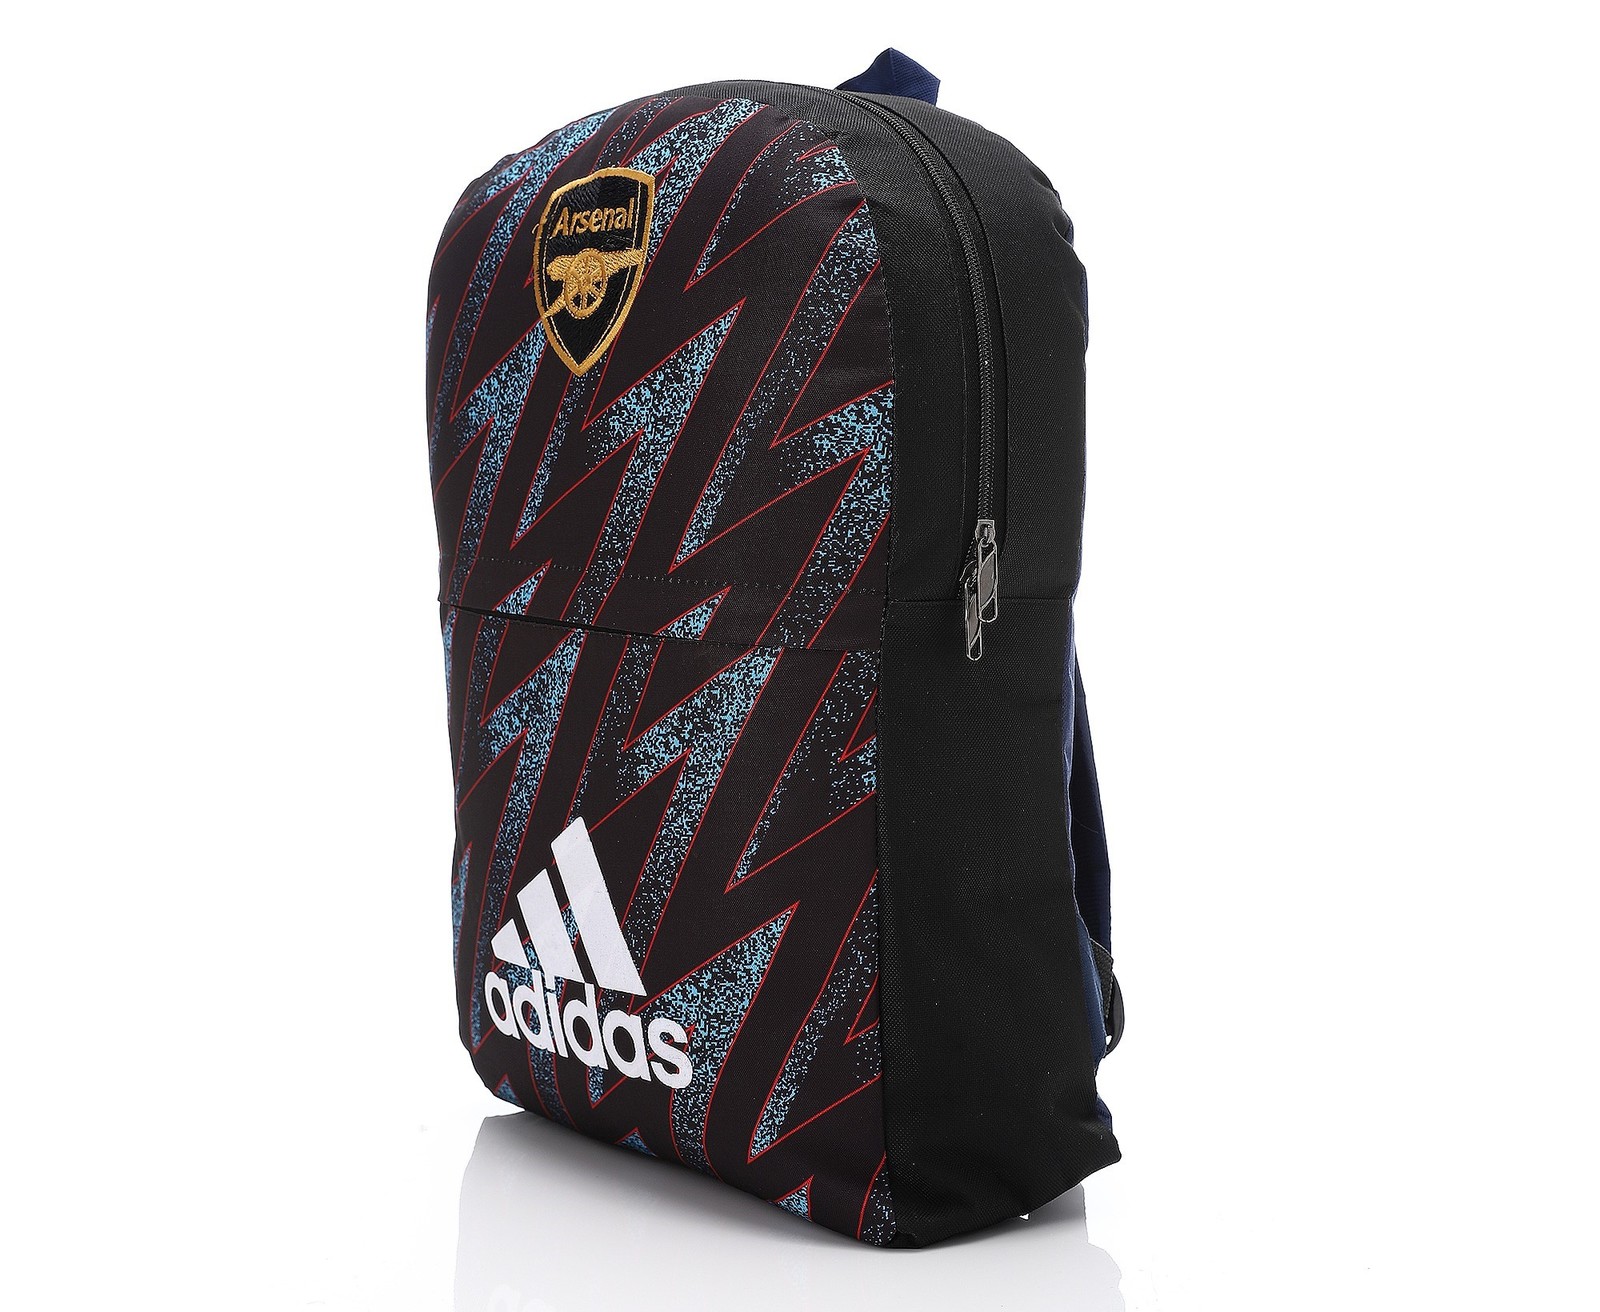 Primary image for X2 Arsenal Backpack // SPECIAL OFFER // FREE SHIPPING 